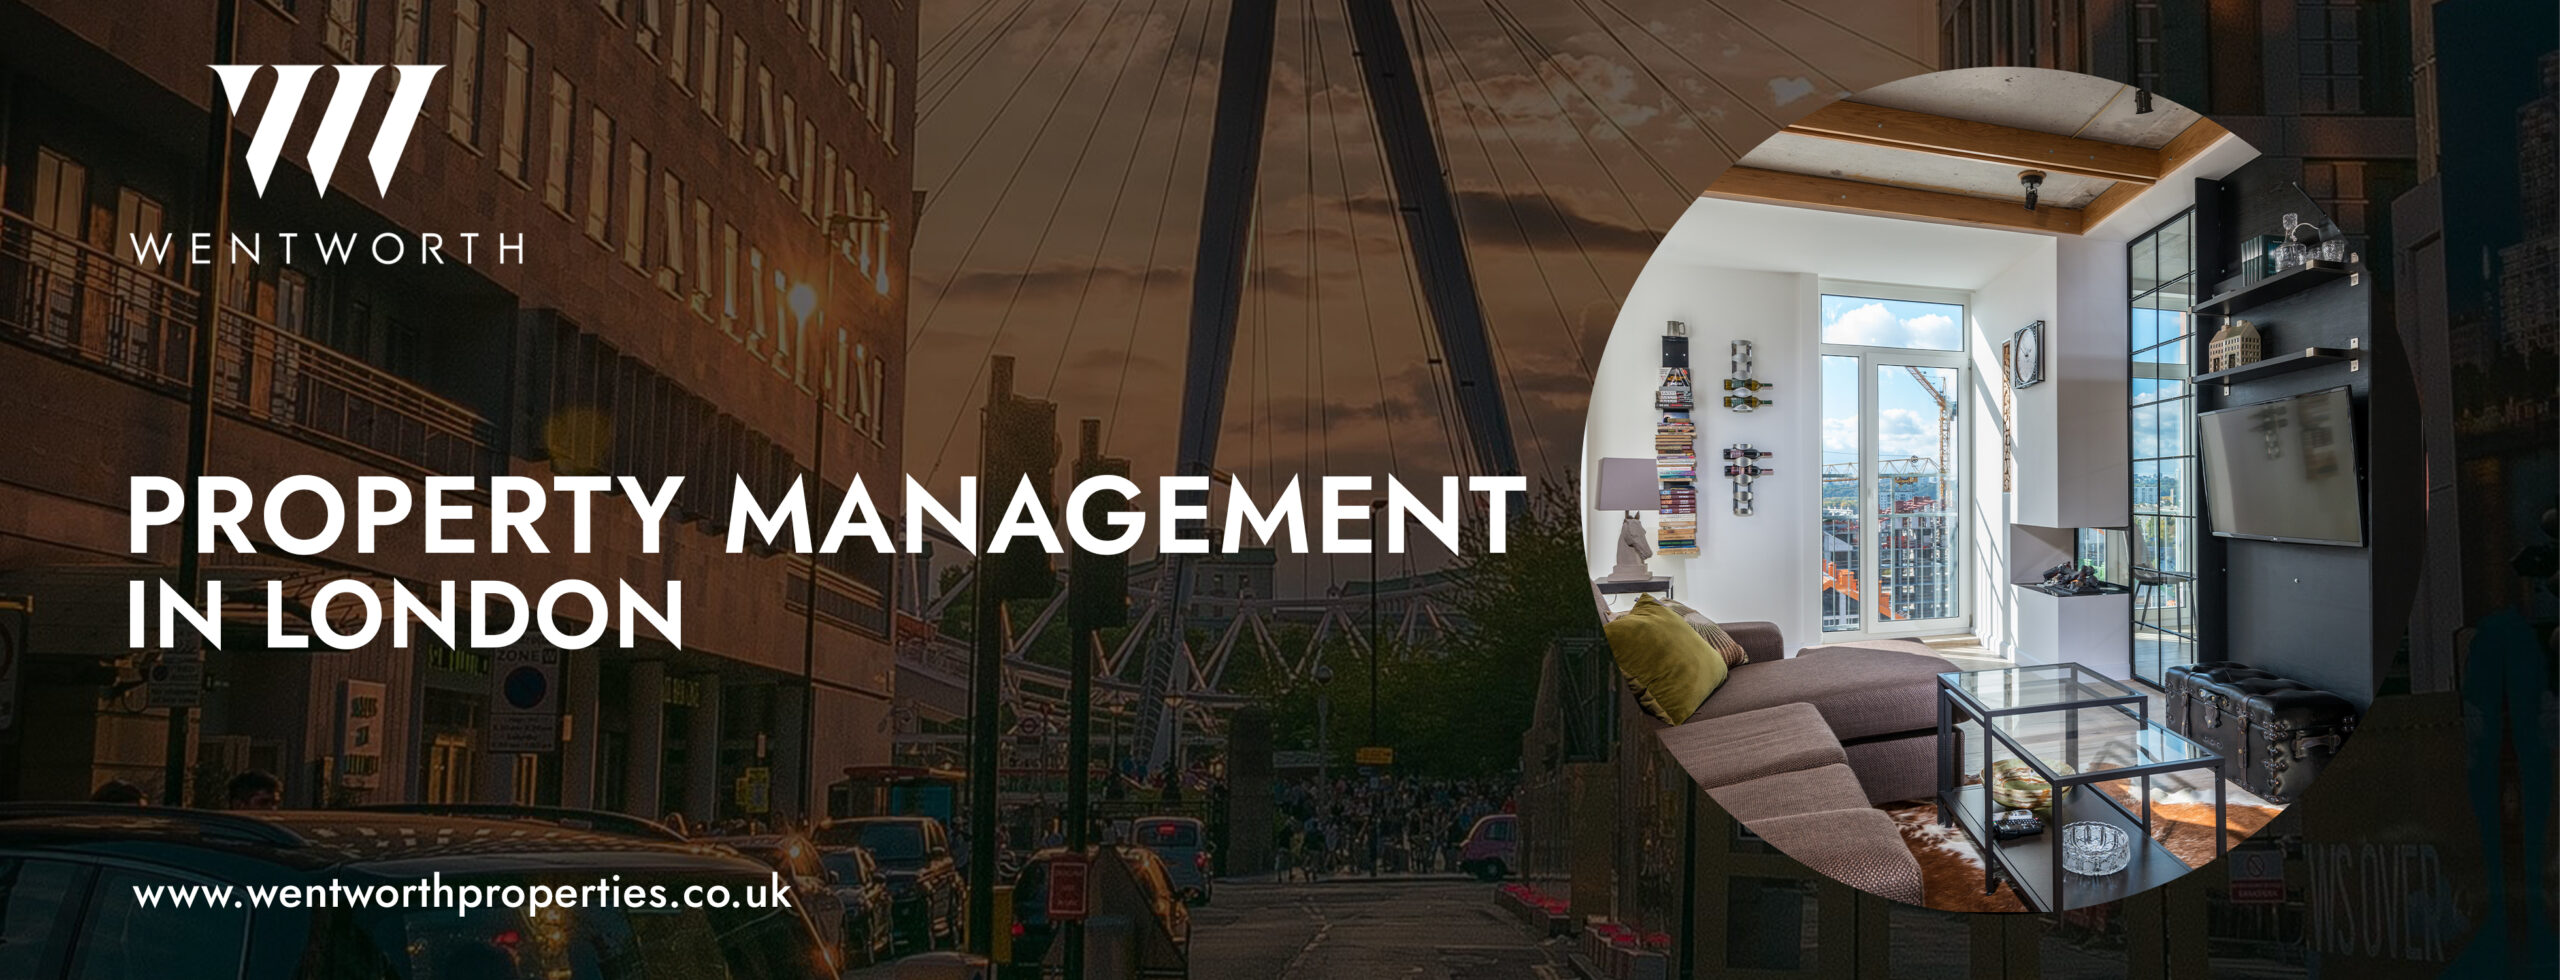 Property Management in London